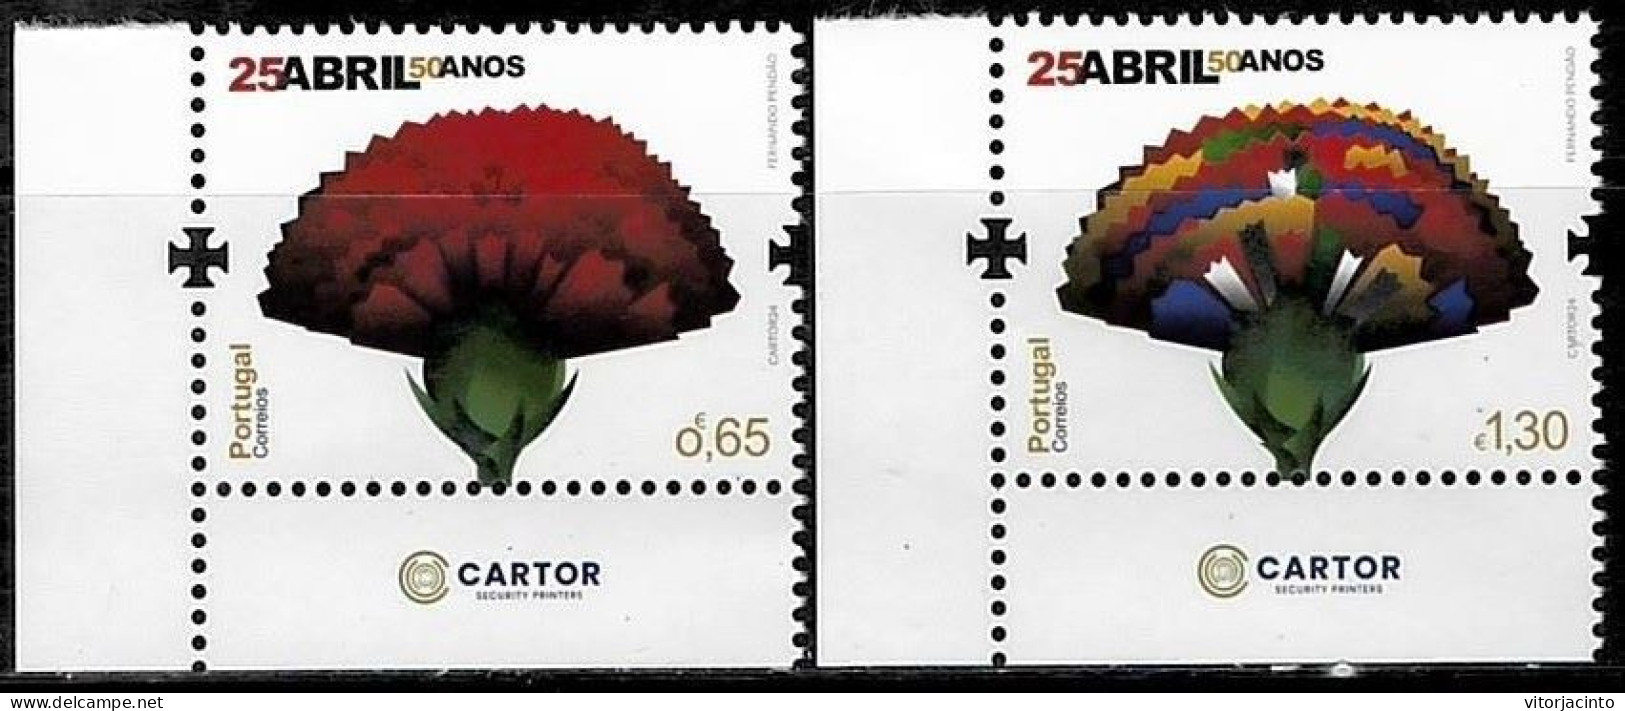 PORTUGAL - 25 April - 50 Years - Joint Issue Angola/Cape Verde/Portugal (Mint Stamps) - Date Of Issue: 2024-03-28 - Nuevos